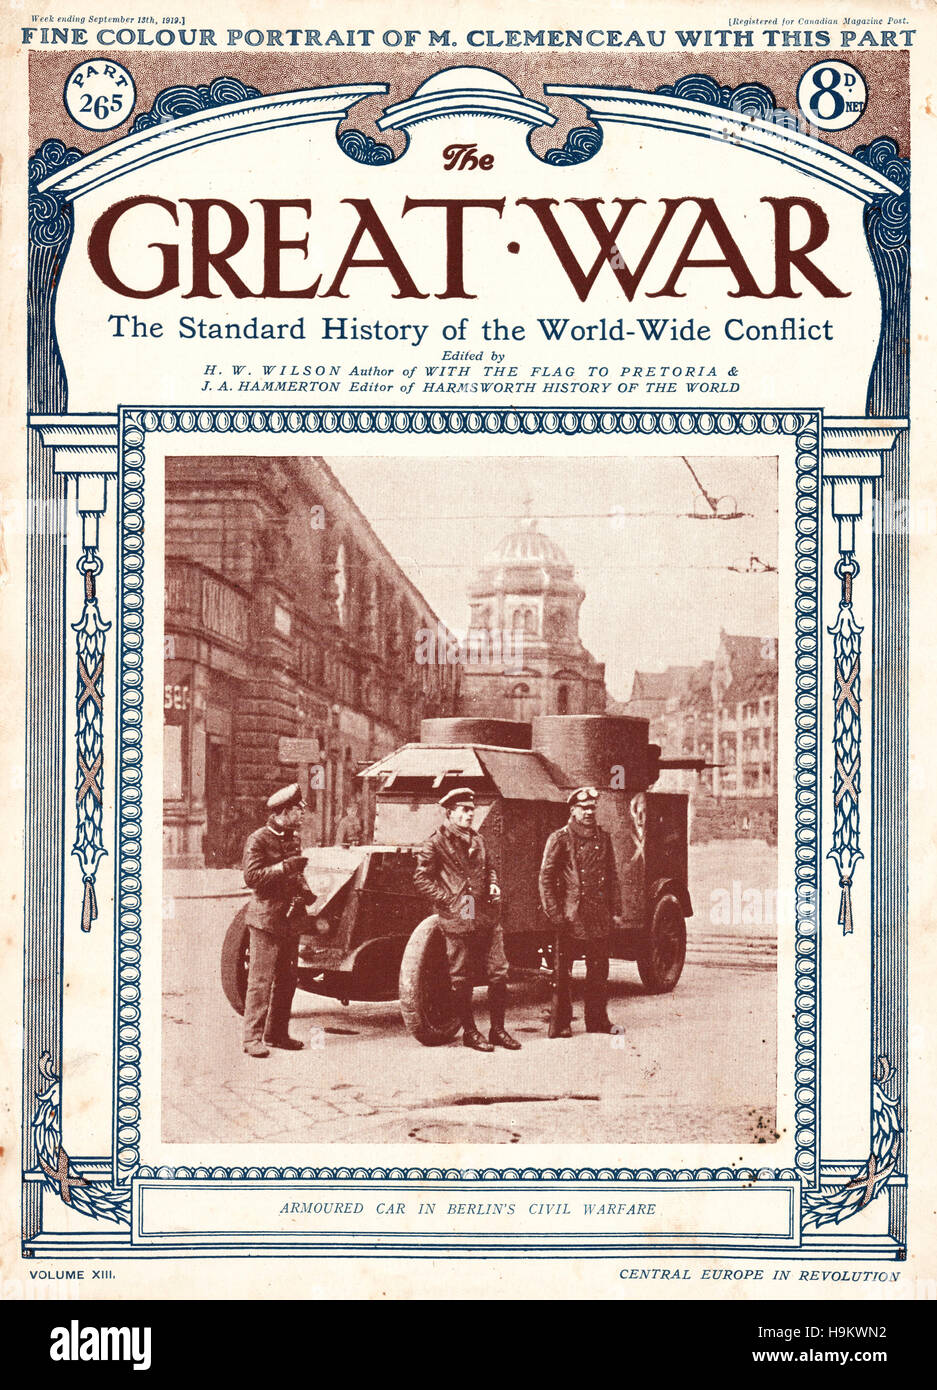 1919 The Great War front page Armoured car in Berlin during civil unrest Stock Photo